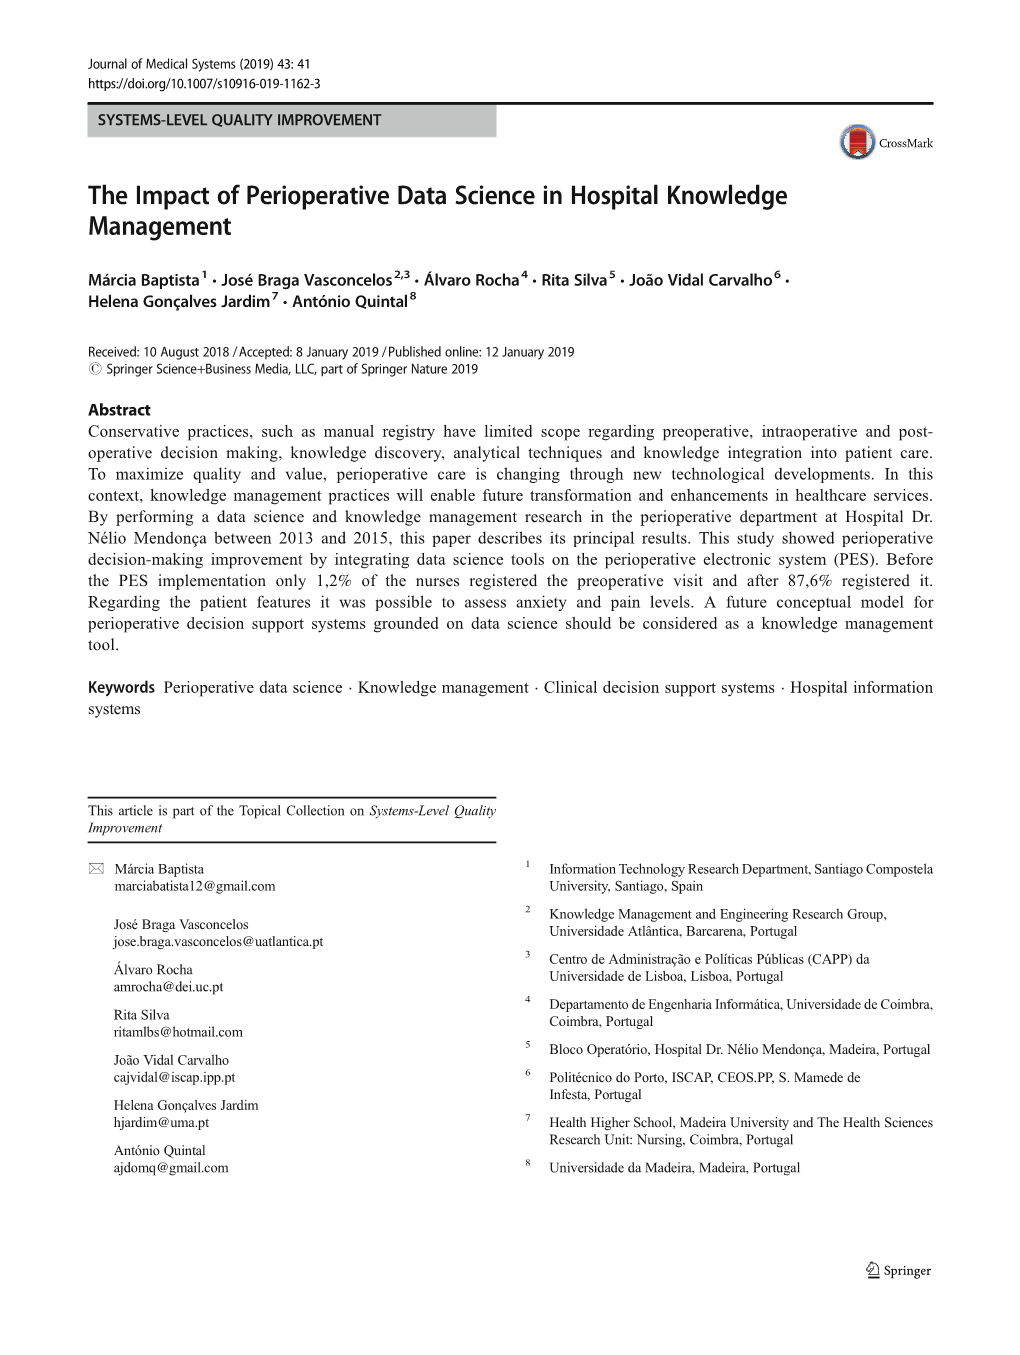 The Impact of Perioperative Data Science in Hospital Knowledge Management